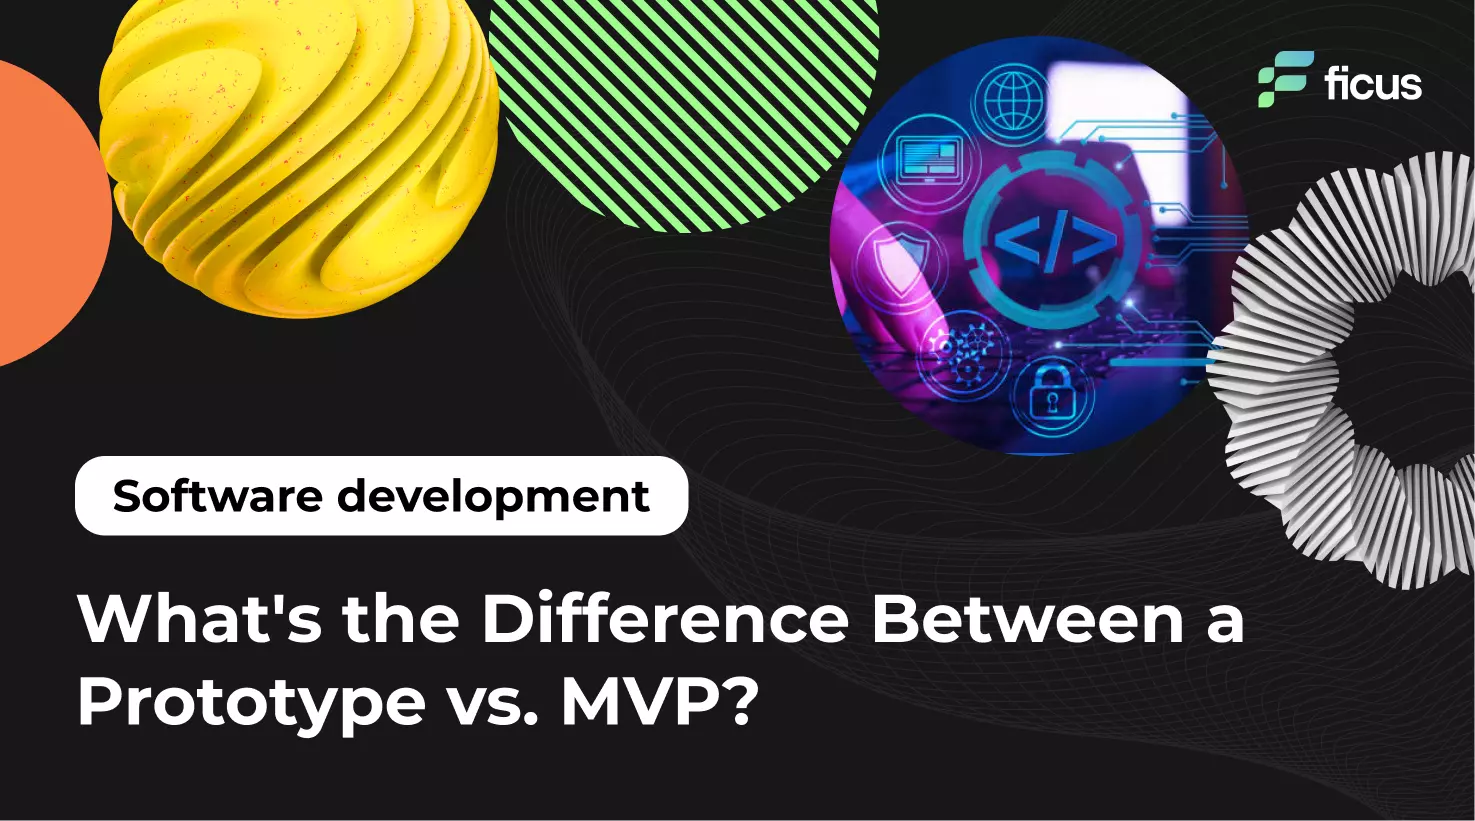 9_What_s the Difference Between a Prototype vs. MVP_